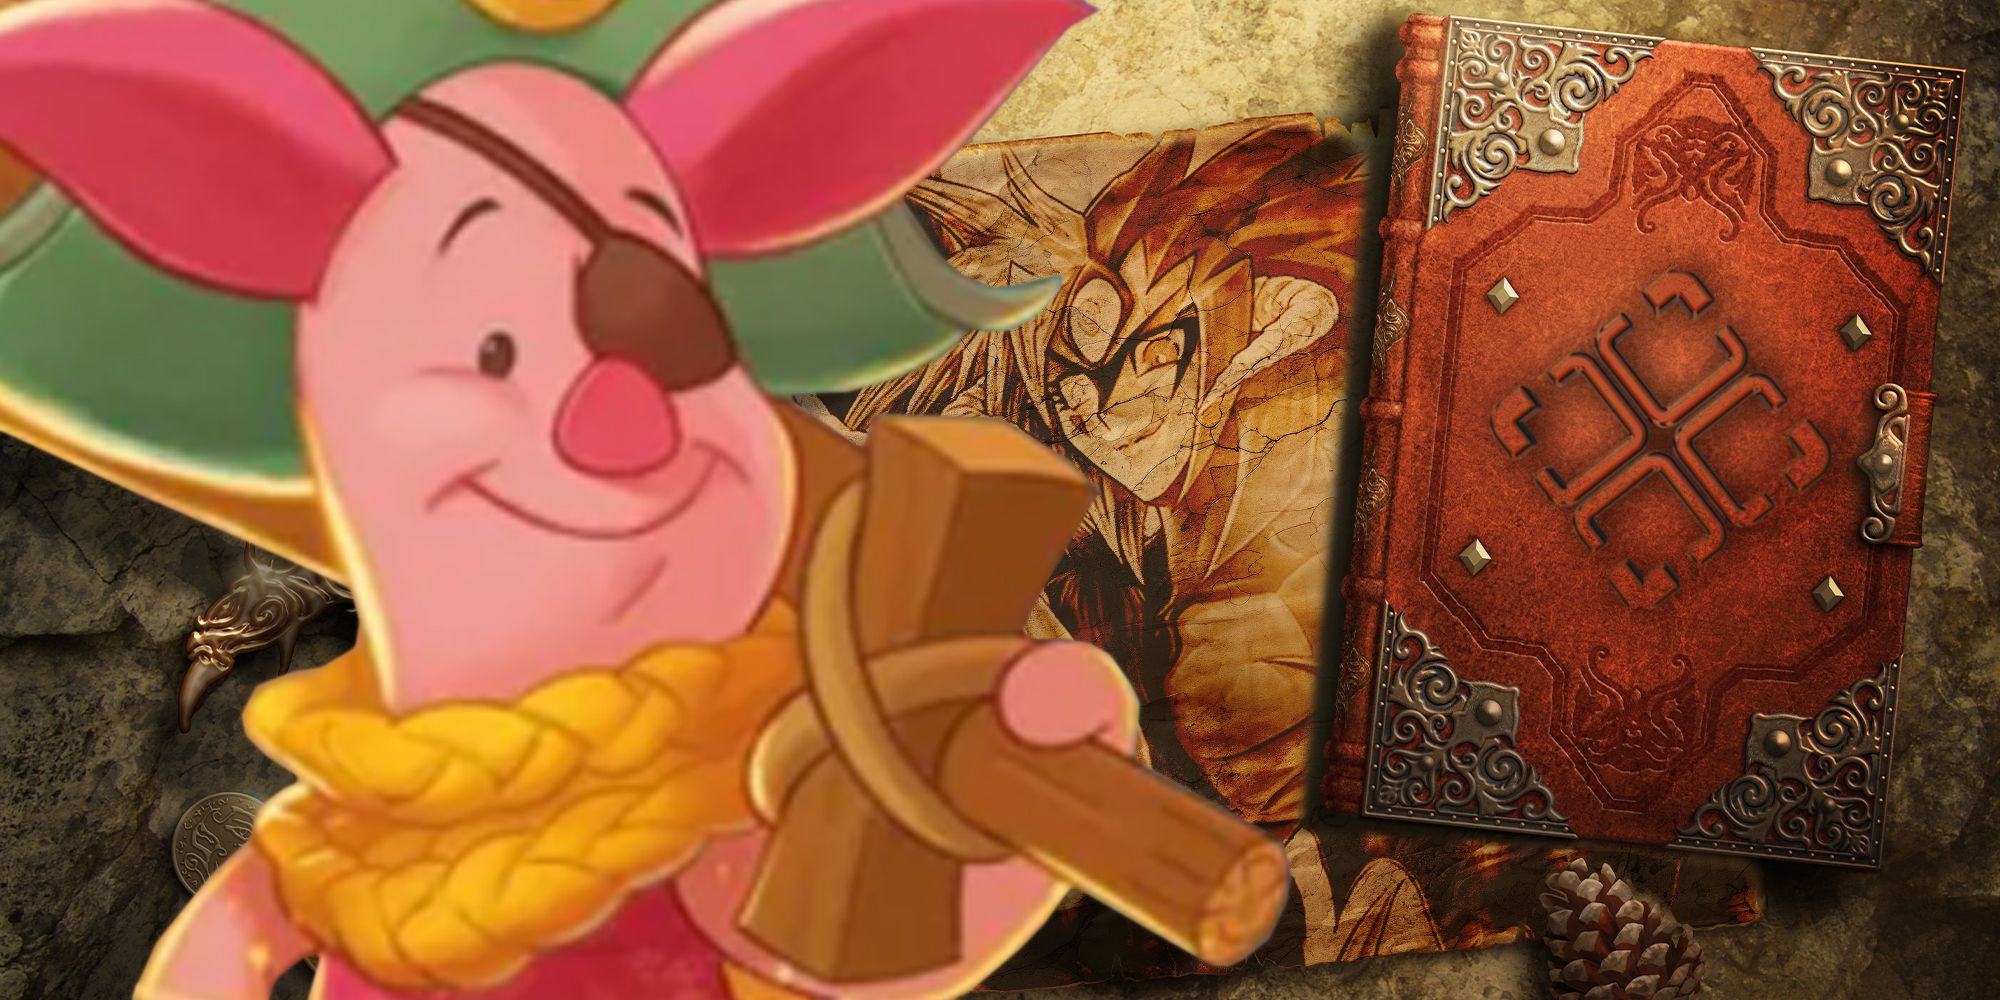 Piglet from Winnie the Pooh in Lorcana over Yu-Gi-Oh art on a medieval fantasy background next to a book with TheGamer logo-2